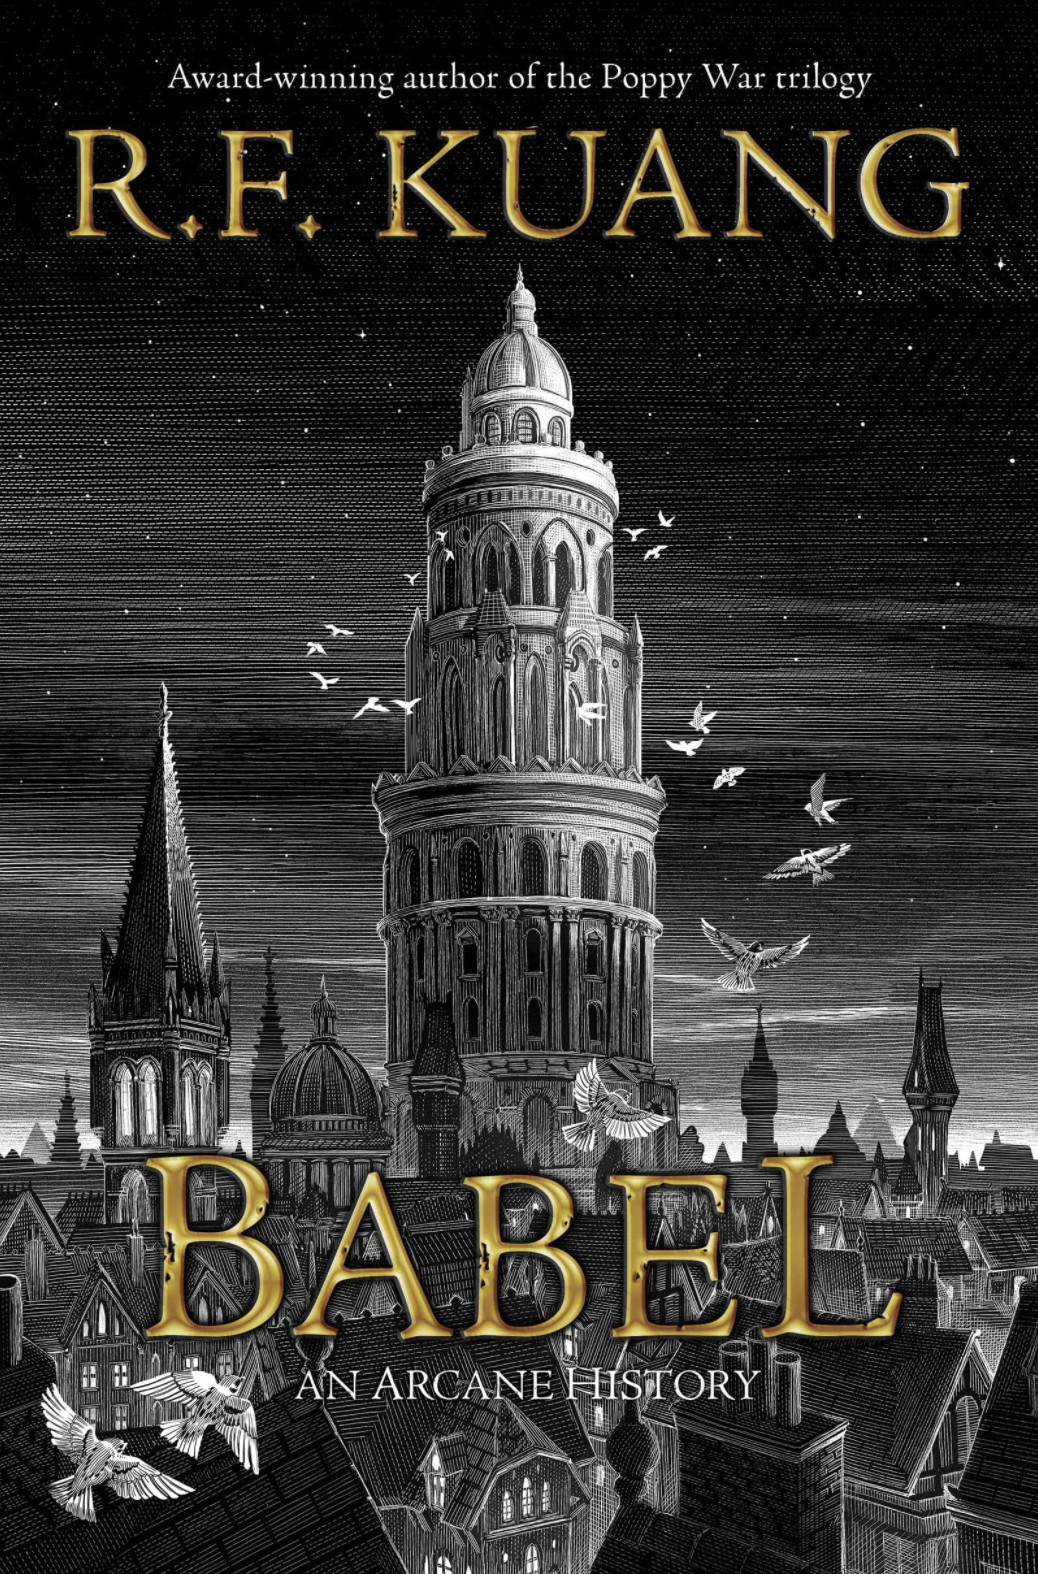 The cover of Babel, or The Necessity of Violence: An Arcane History of the Oxford Translators’ Revolution showing a tower in a black and white illustration